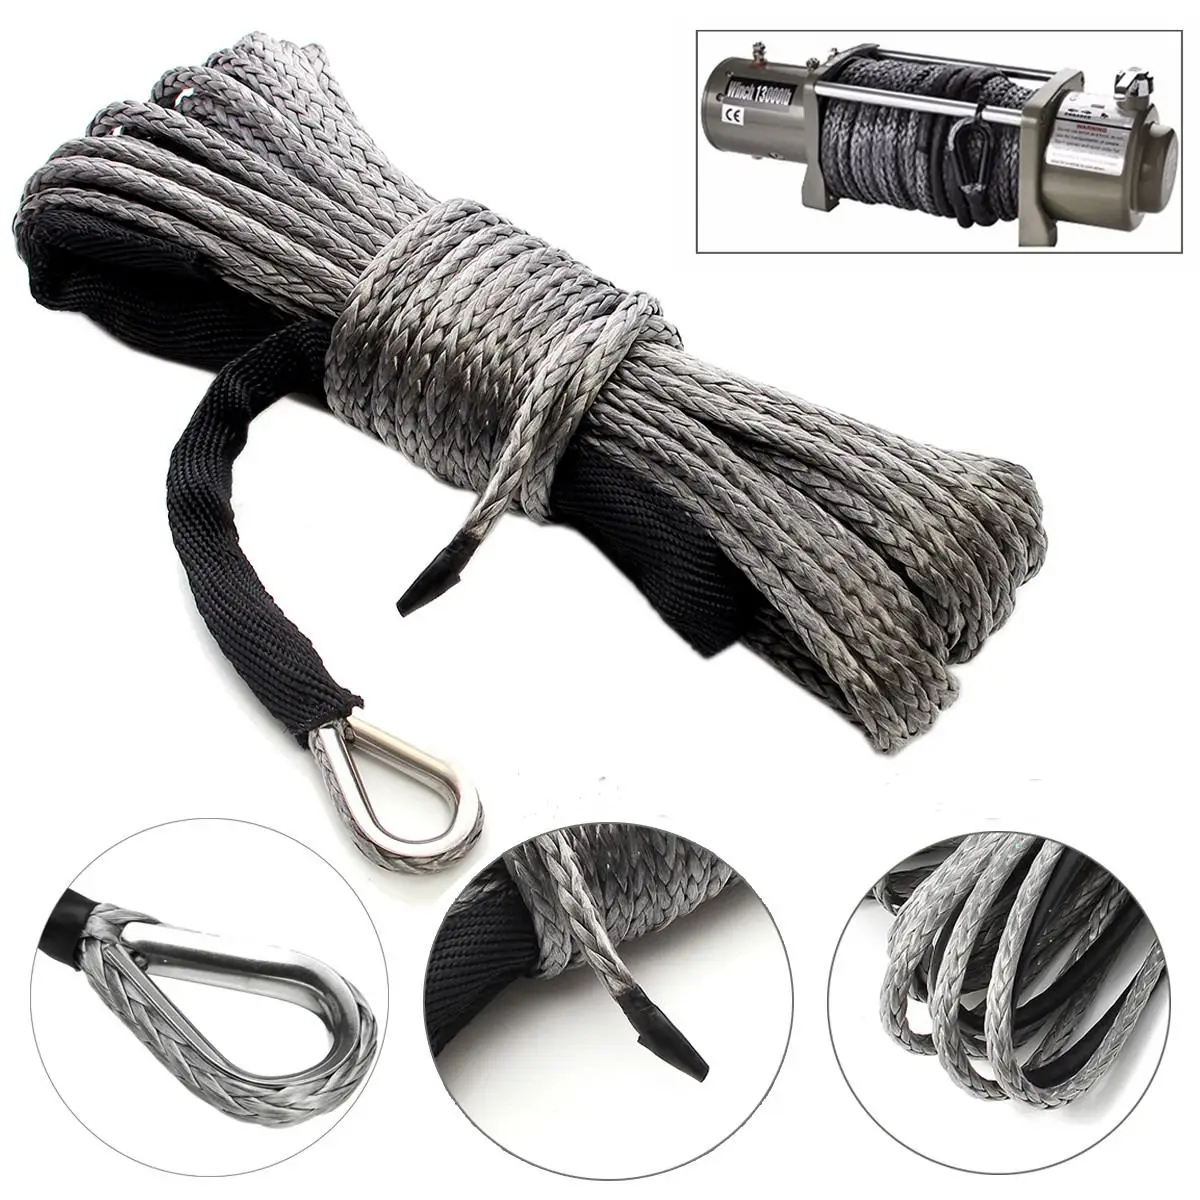 

15m 7700LBs Synthetic Winch Rope Line Cable with Sheath ATV UTV Capstan Gray Towing Rope Car Wash Maintenance Auto String